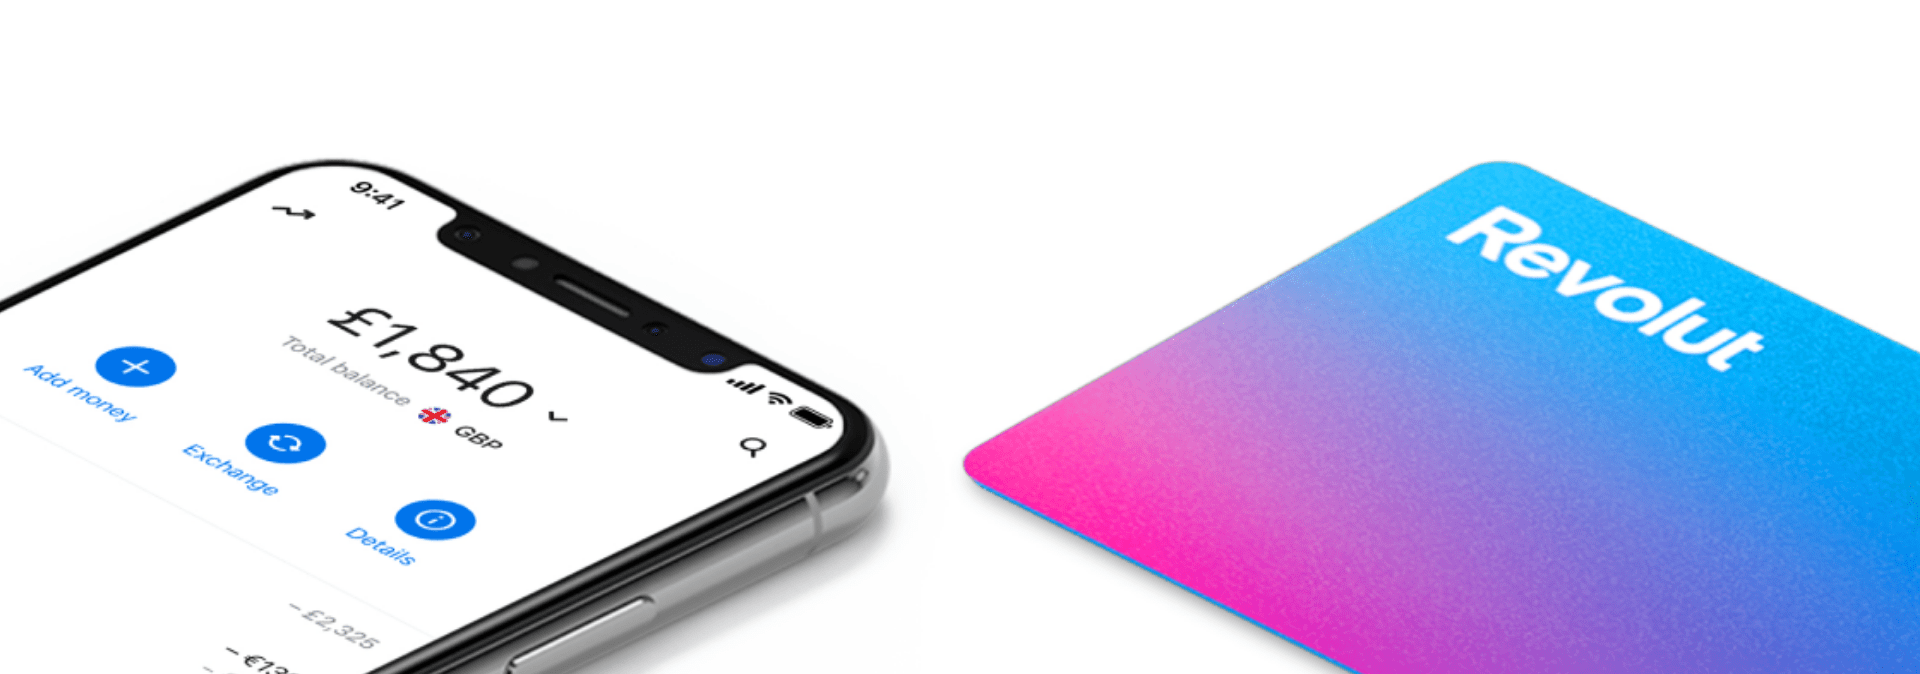 The Revolut Innovation Series [Part 1] 4 reasons why Revolut is such a great product